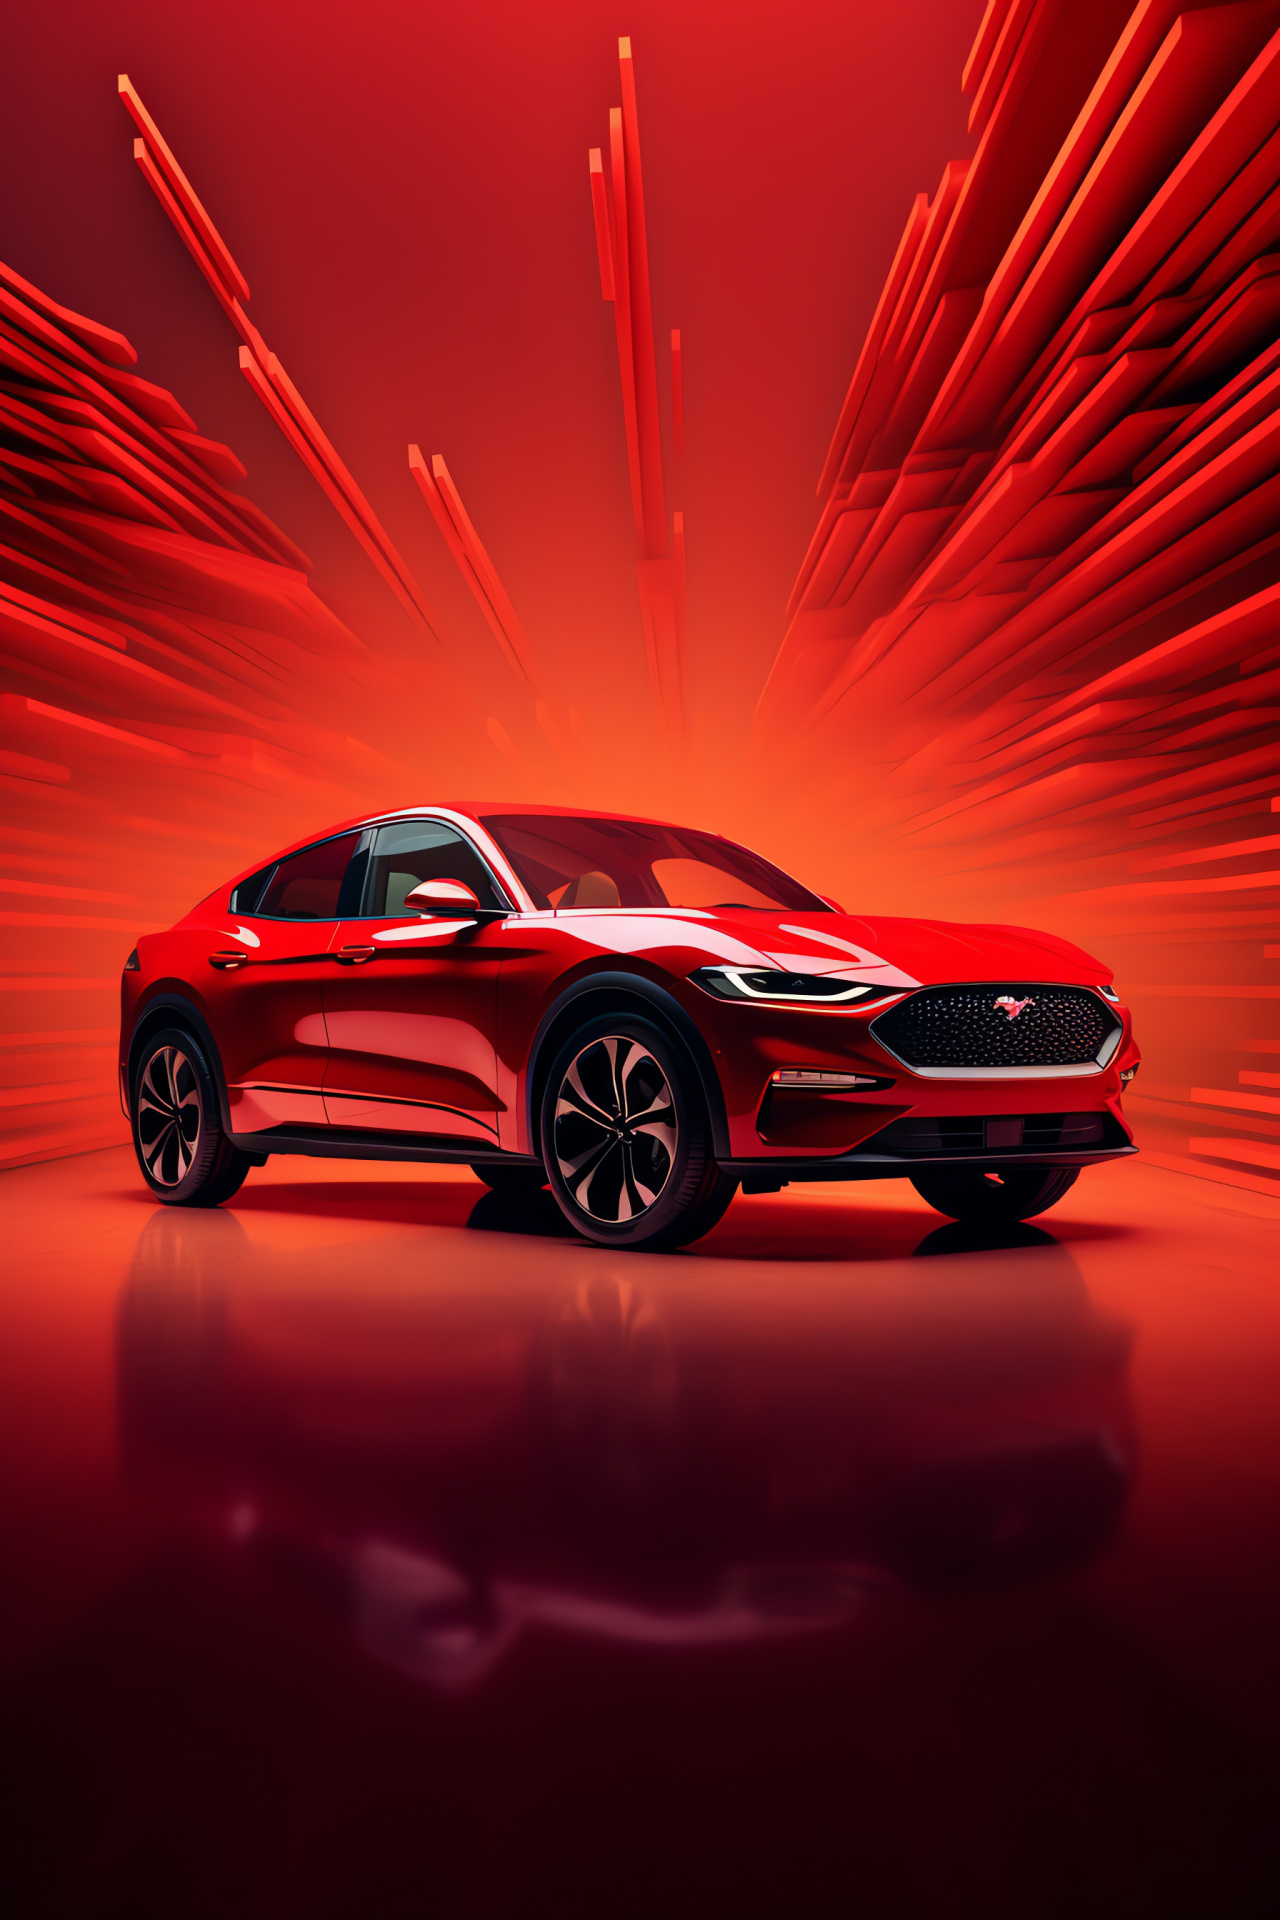 Mustang vehicle, Pure red shade, Powerful electric engine, Automotive design, Sportscar aesthetic, HD Phone Image